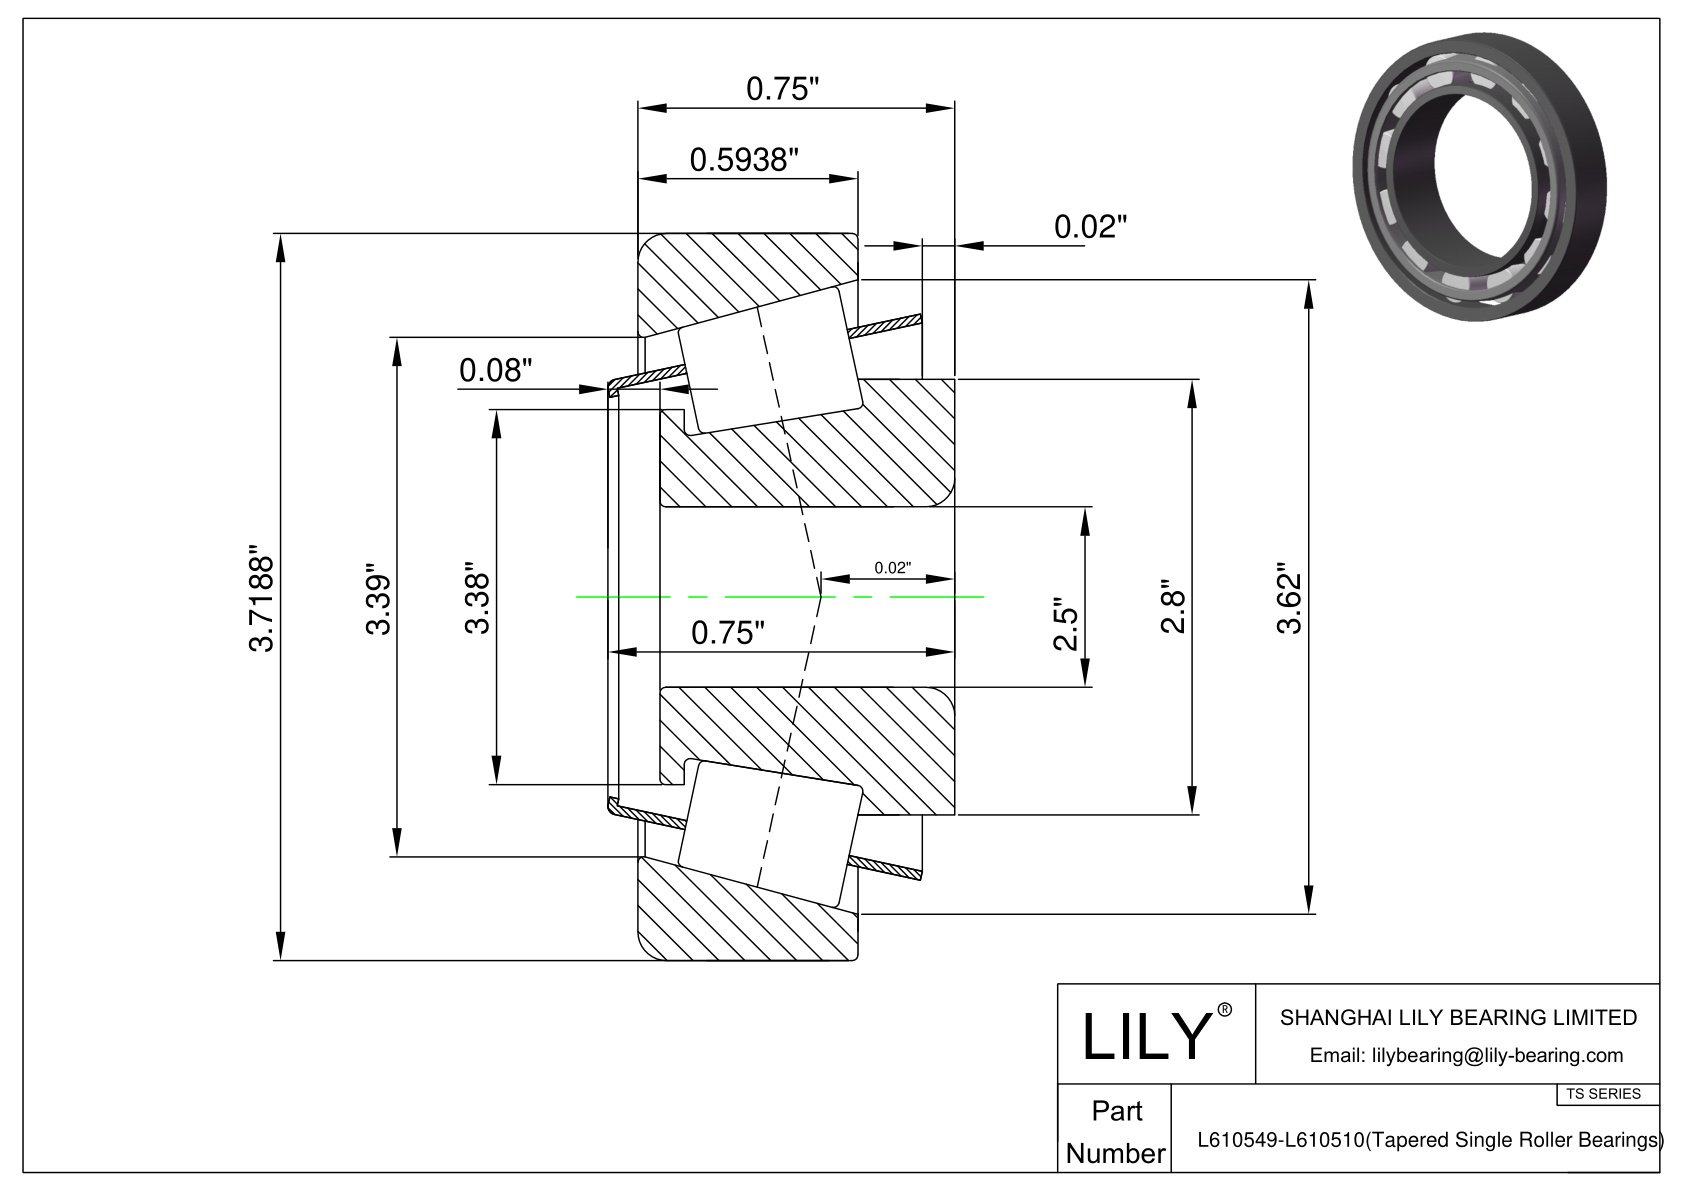 L610549-L610510 TS (Tapered Single Roller Bearings) (Imperial) cad drawing